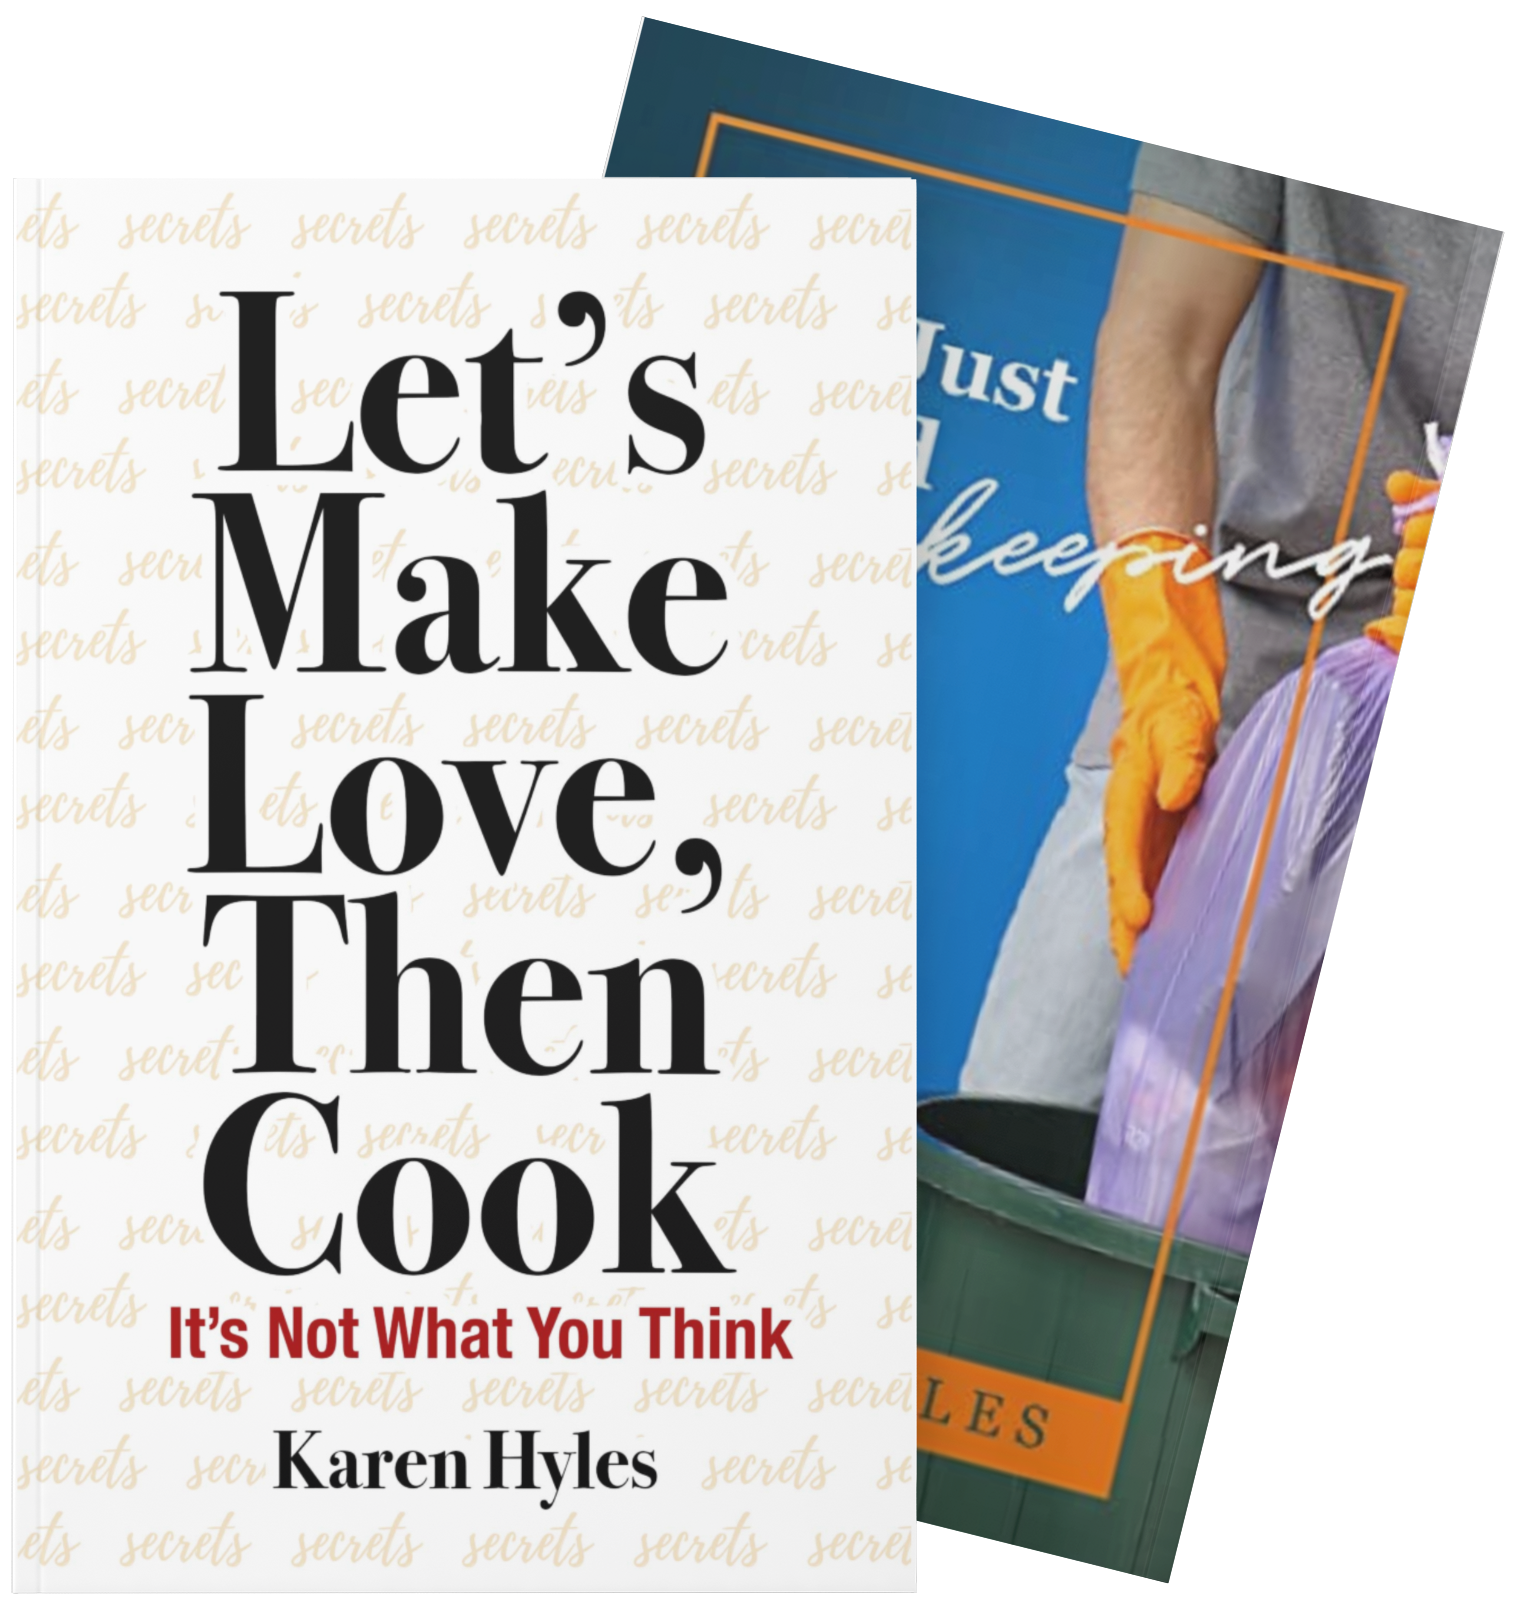 Let's Make Love, Then Cook, book by Karen Hyles